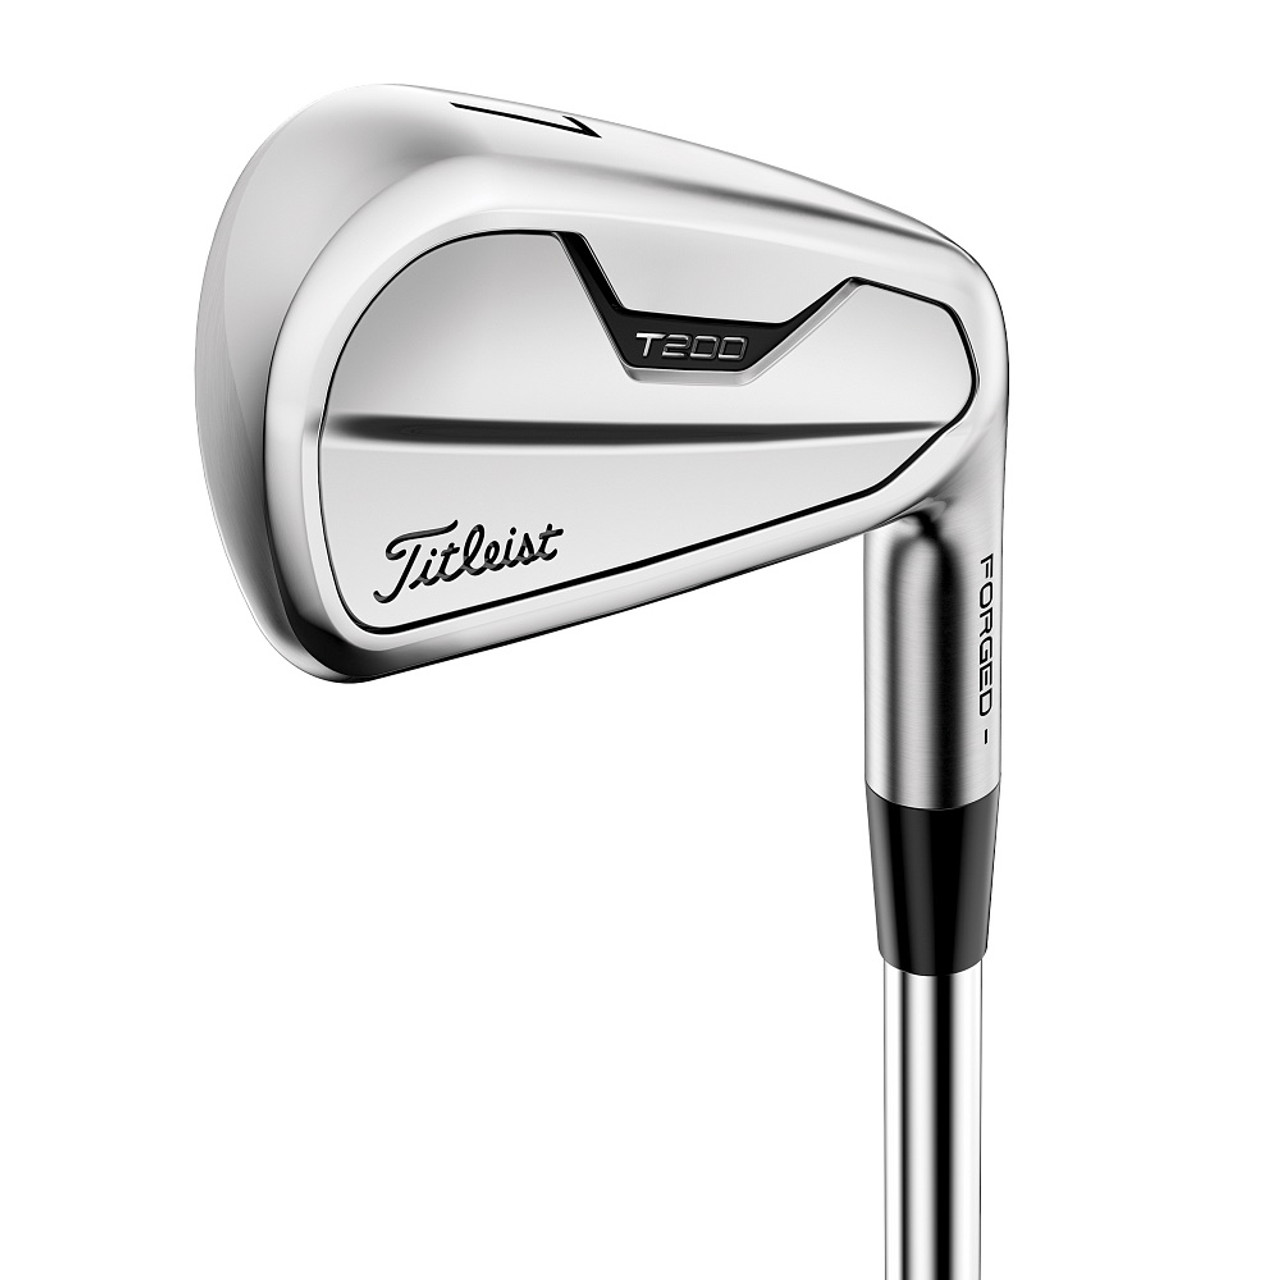 Titleist T200 Irons - Just Say Golf